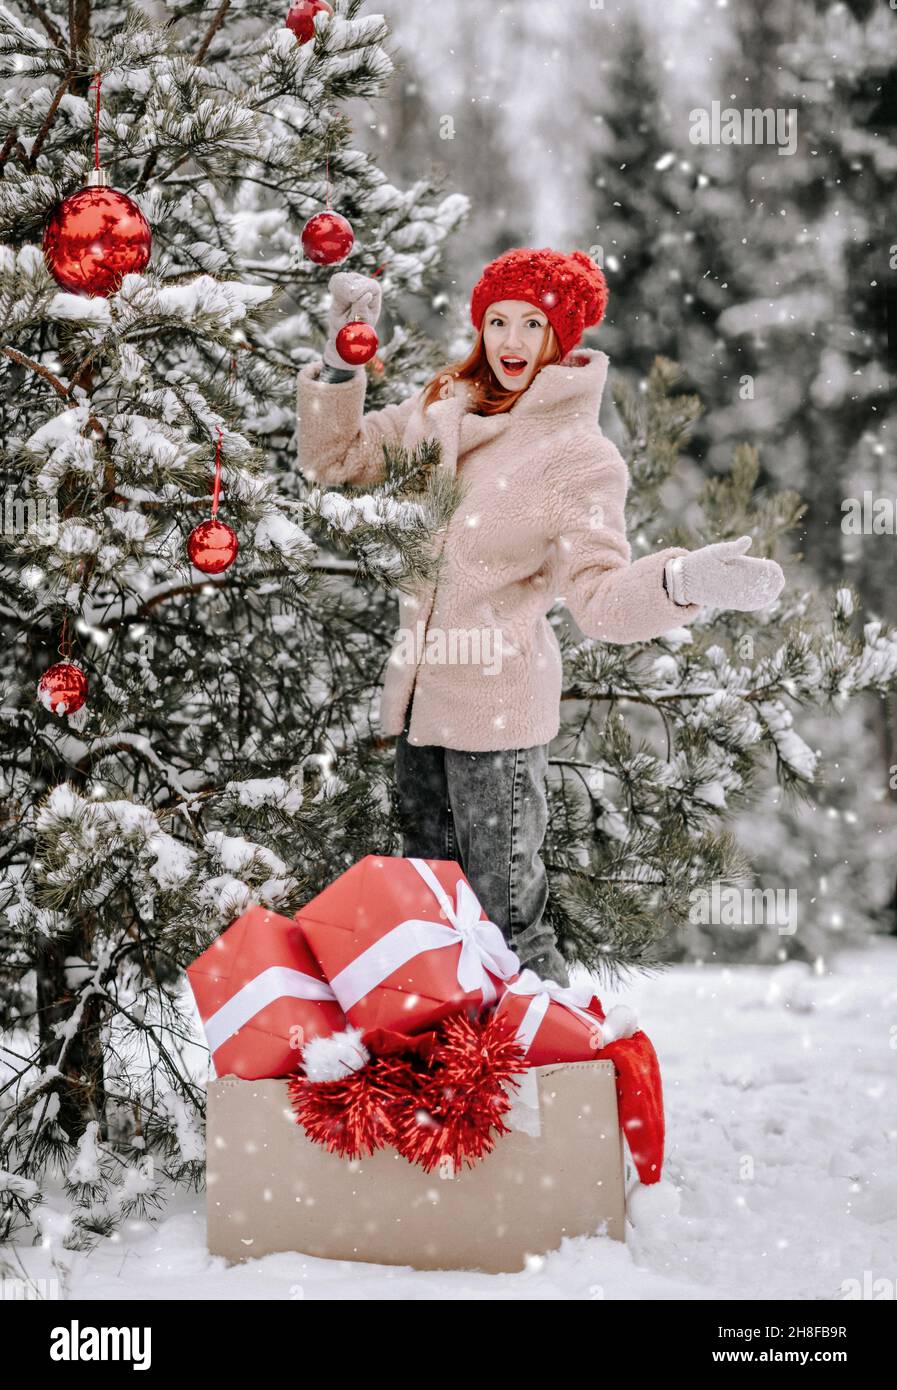 Young positive surprised woman in stylish clothing standing near decorated Christmas tree with heaps of present boxes outdoors Stock Photo